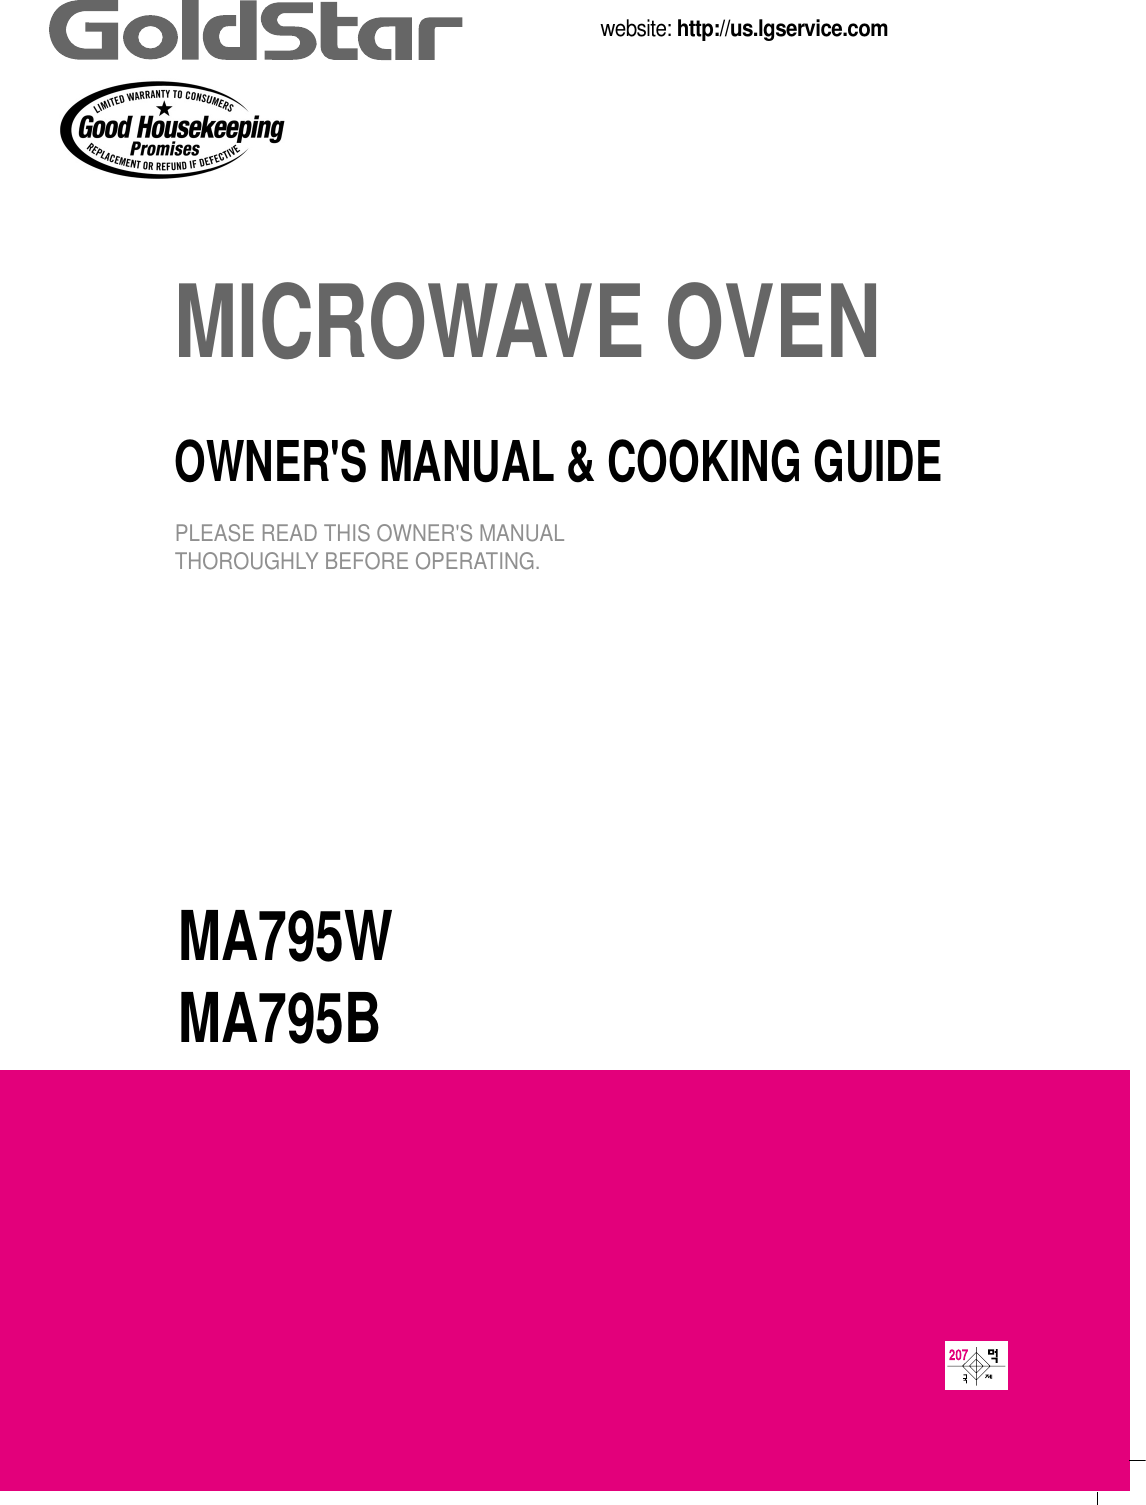 MA795WMA795BMICROWAVE OVENOWNER&apos;S MANUAL &amp; COOKING GUIDEPLEASE READ THIS OWNER&apos;S MANUALTHOROUGHLY BEFORE OPERATING.website: http://us.lgservice.com